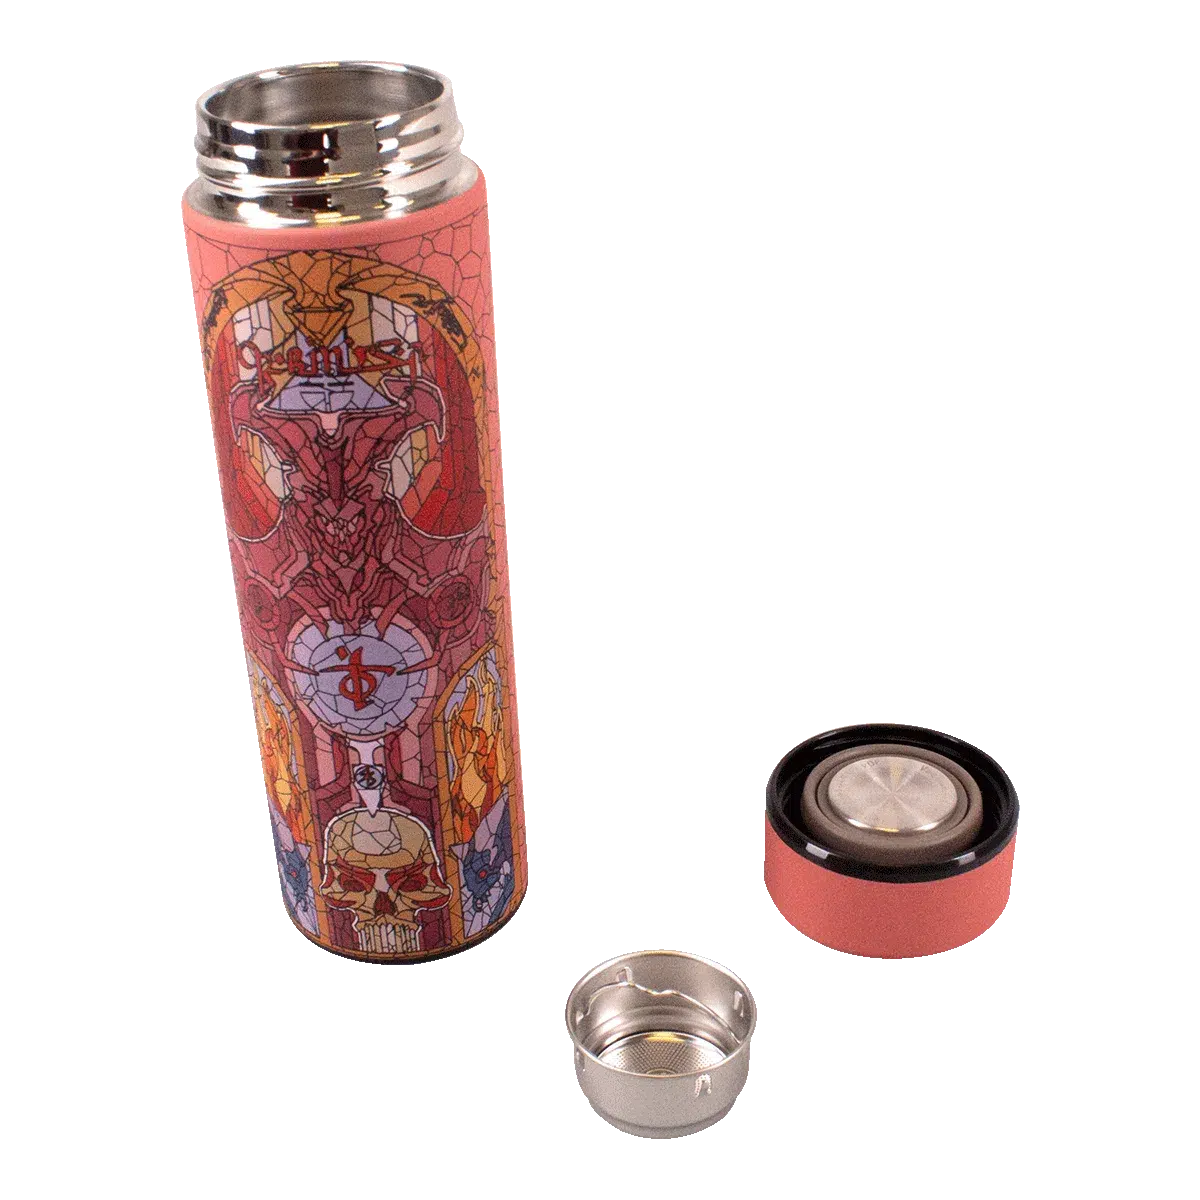 DOOM Eternal Thermo Bottle "Glass Stained Sentinel" Image 2